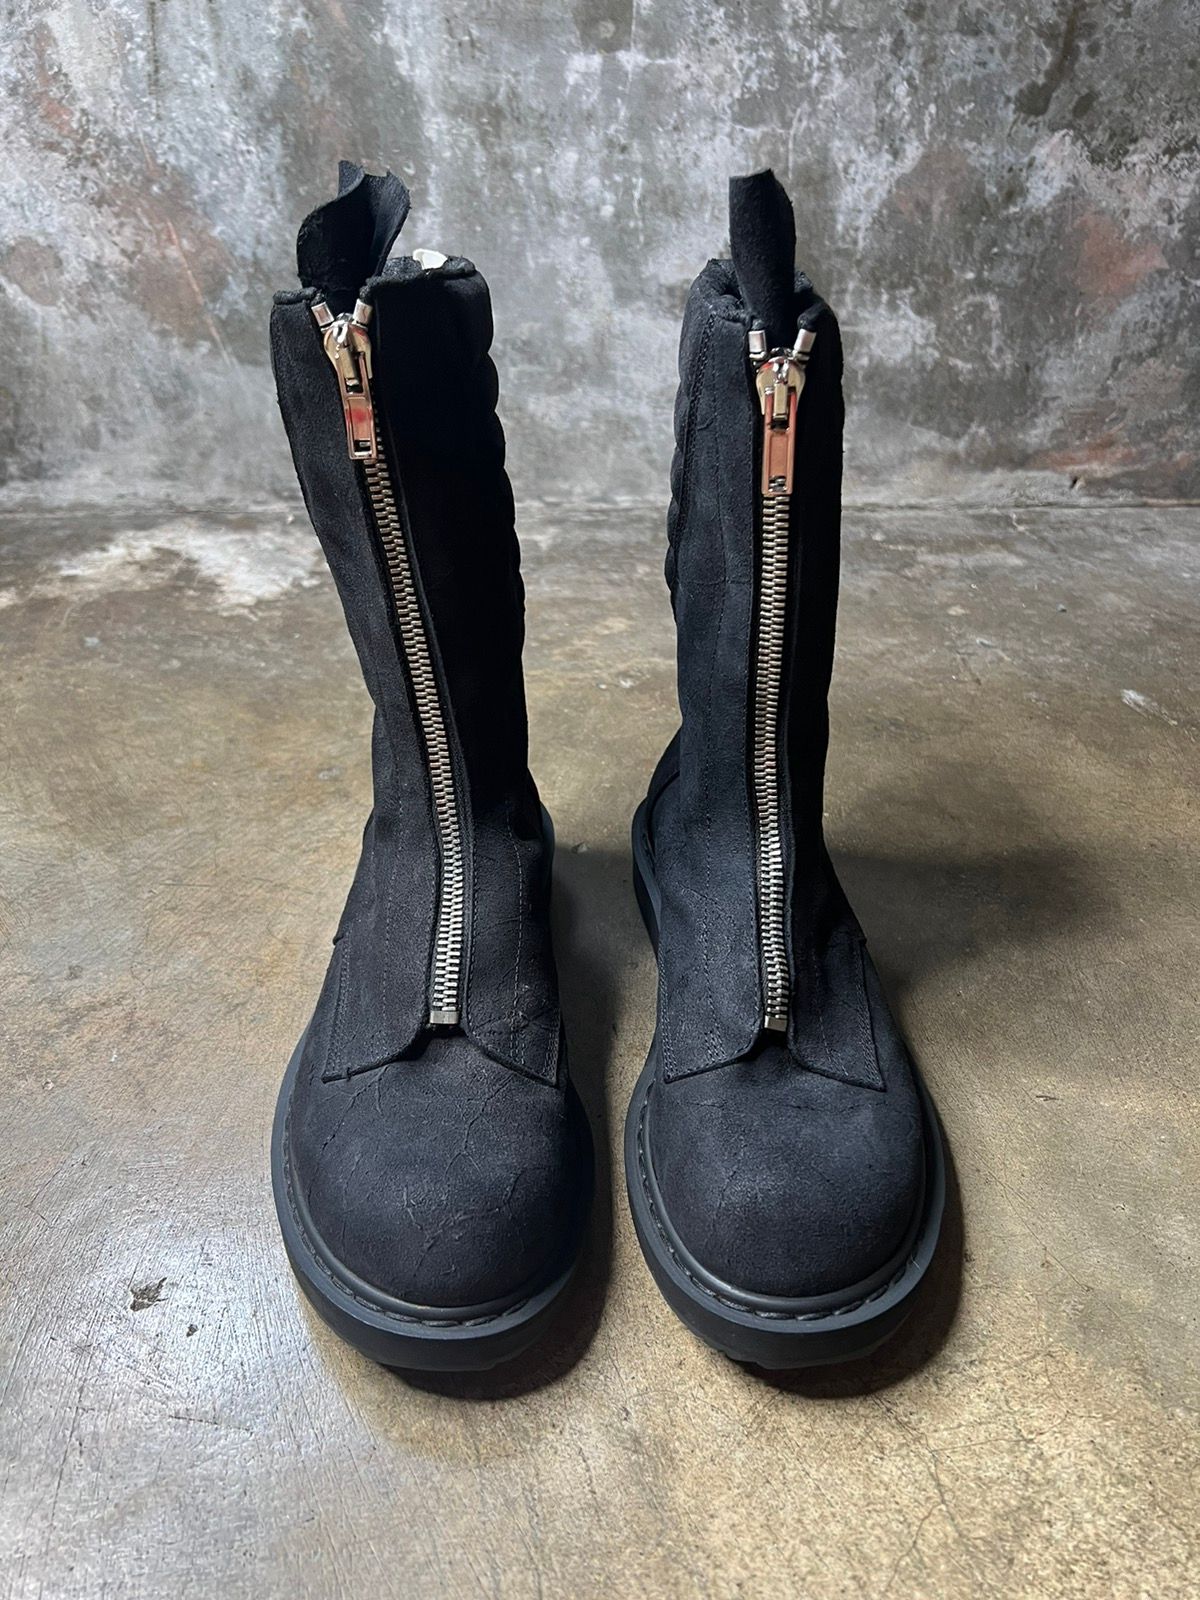 Rick Owens Rick Owens F/W 11 Limo Blistered Mohawk Boots | Grailed